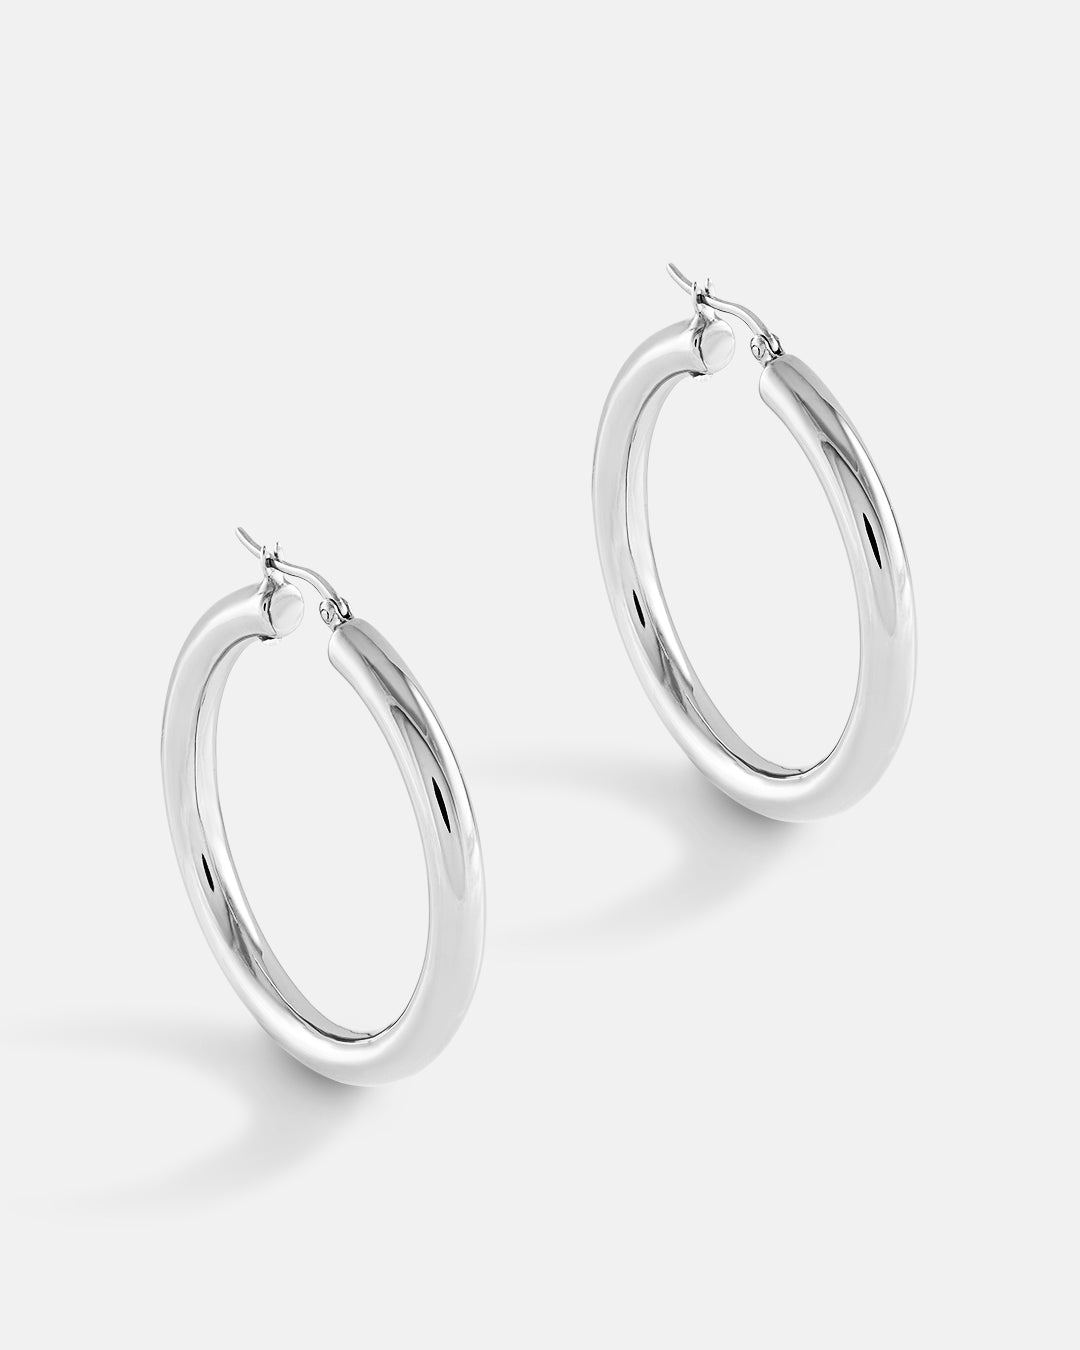 This is the product picture of a classic hoop earrings plated in white gold in sterling silver material